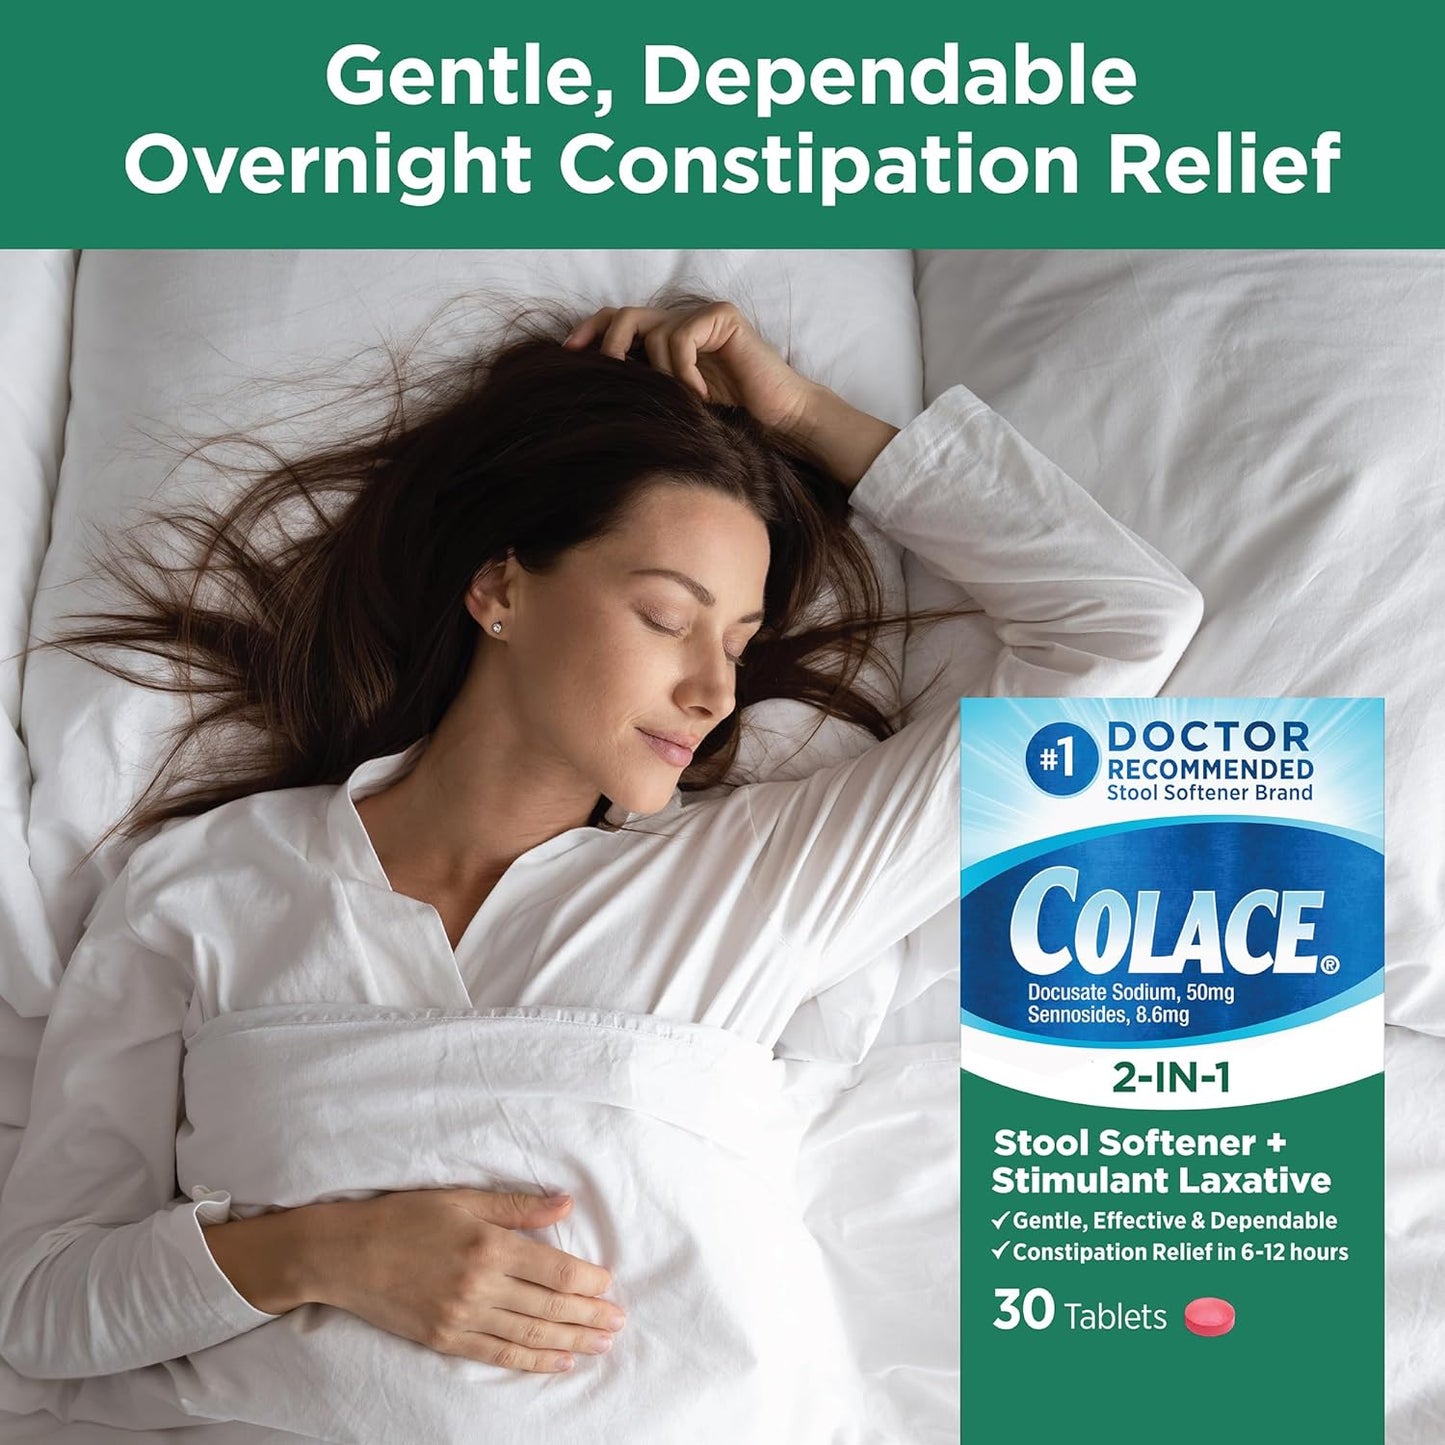 Colace Regular Strength Stool Softener 100 mg Capsules 60 Count Docusate Sodium Stool Softener for Gentle Dependable Relief